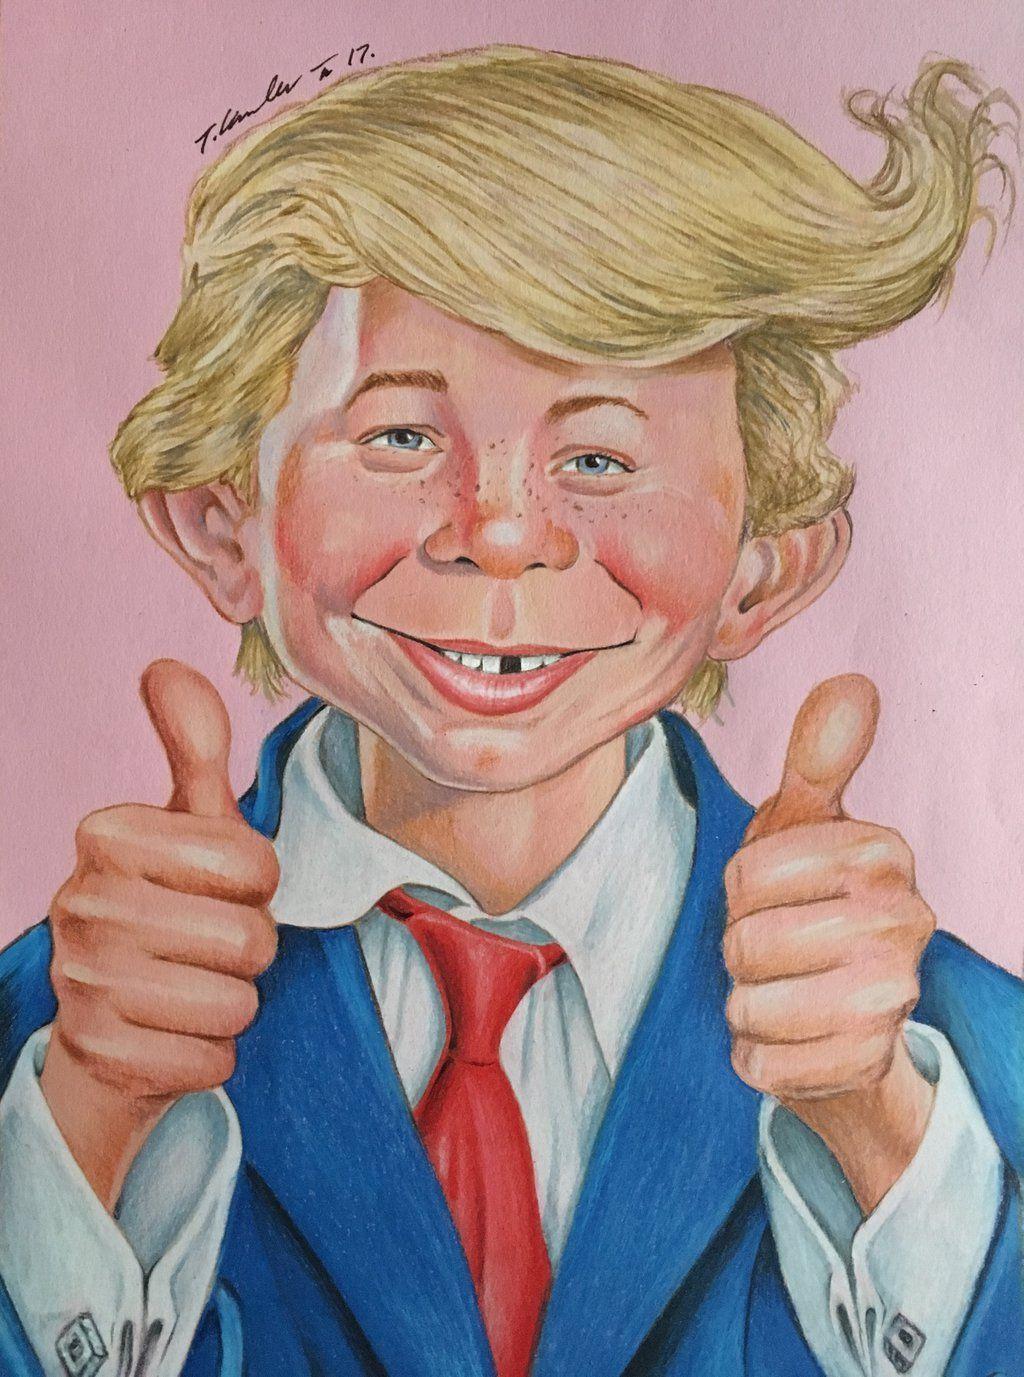 Image result for trump as alfred e neuman. Miscellaneous. Alfred e